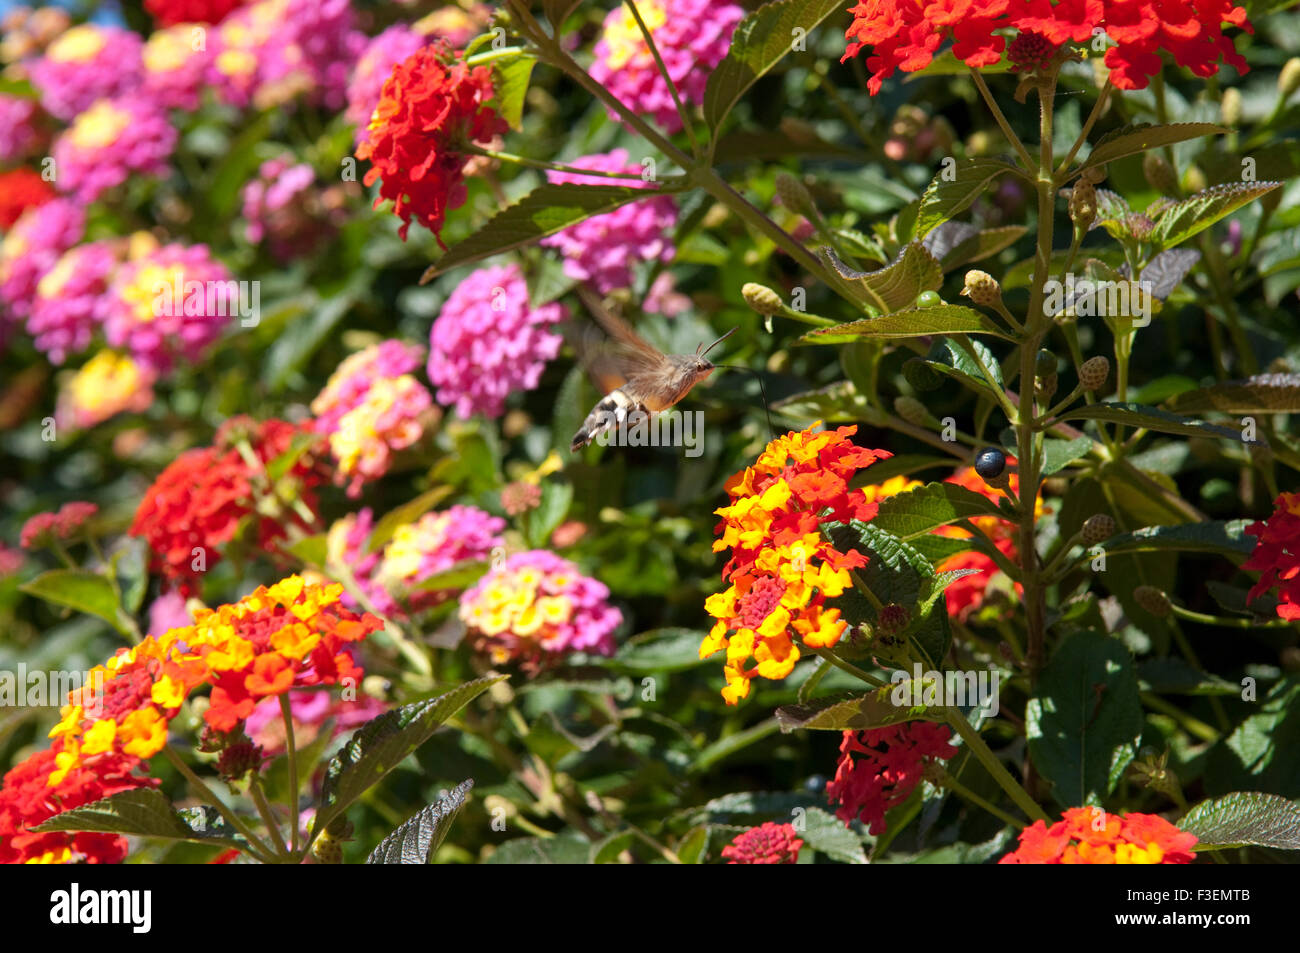 Wandelrose High Resolution Stock Photography and Images - Alamy